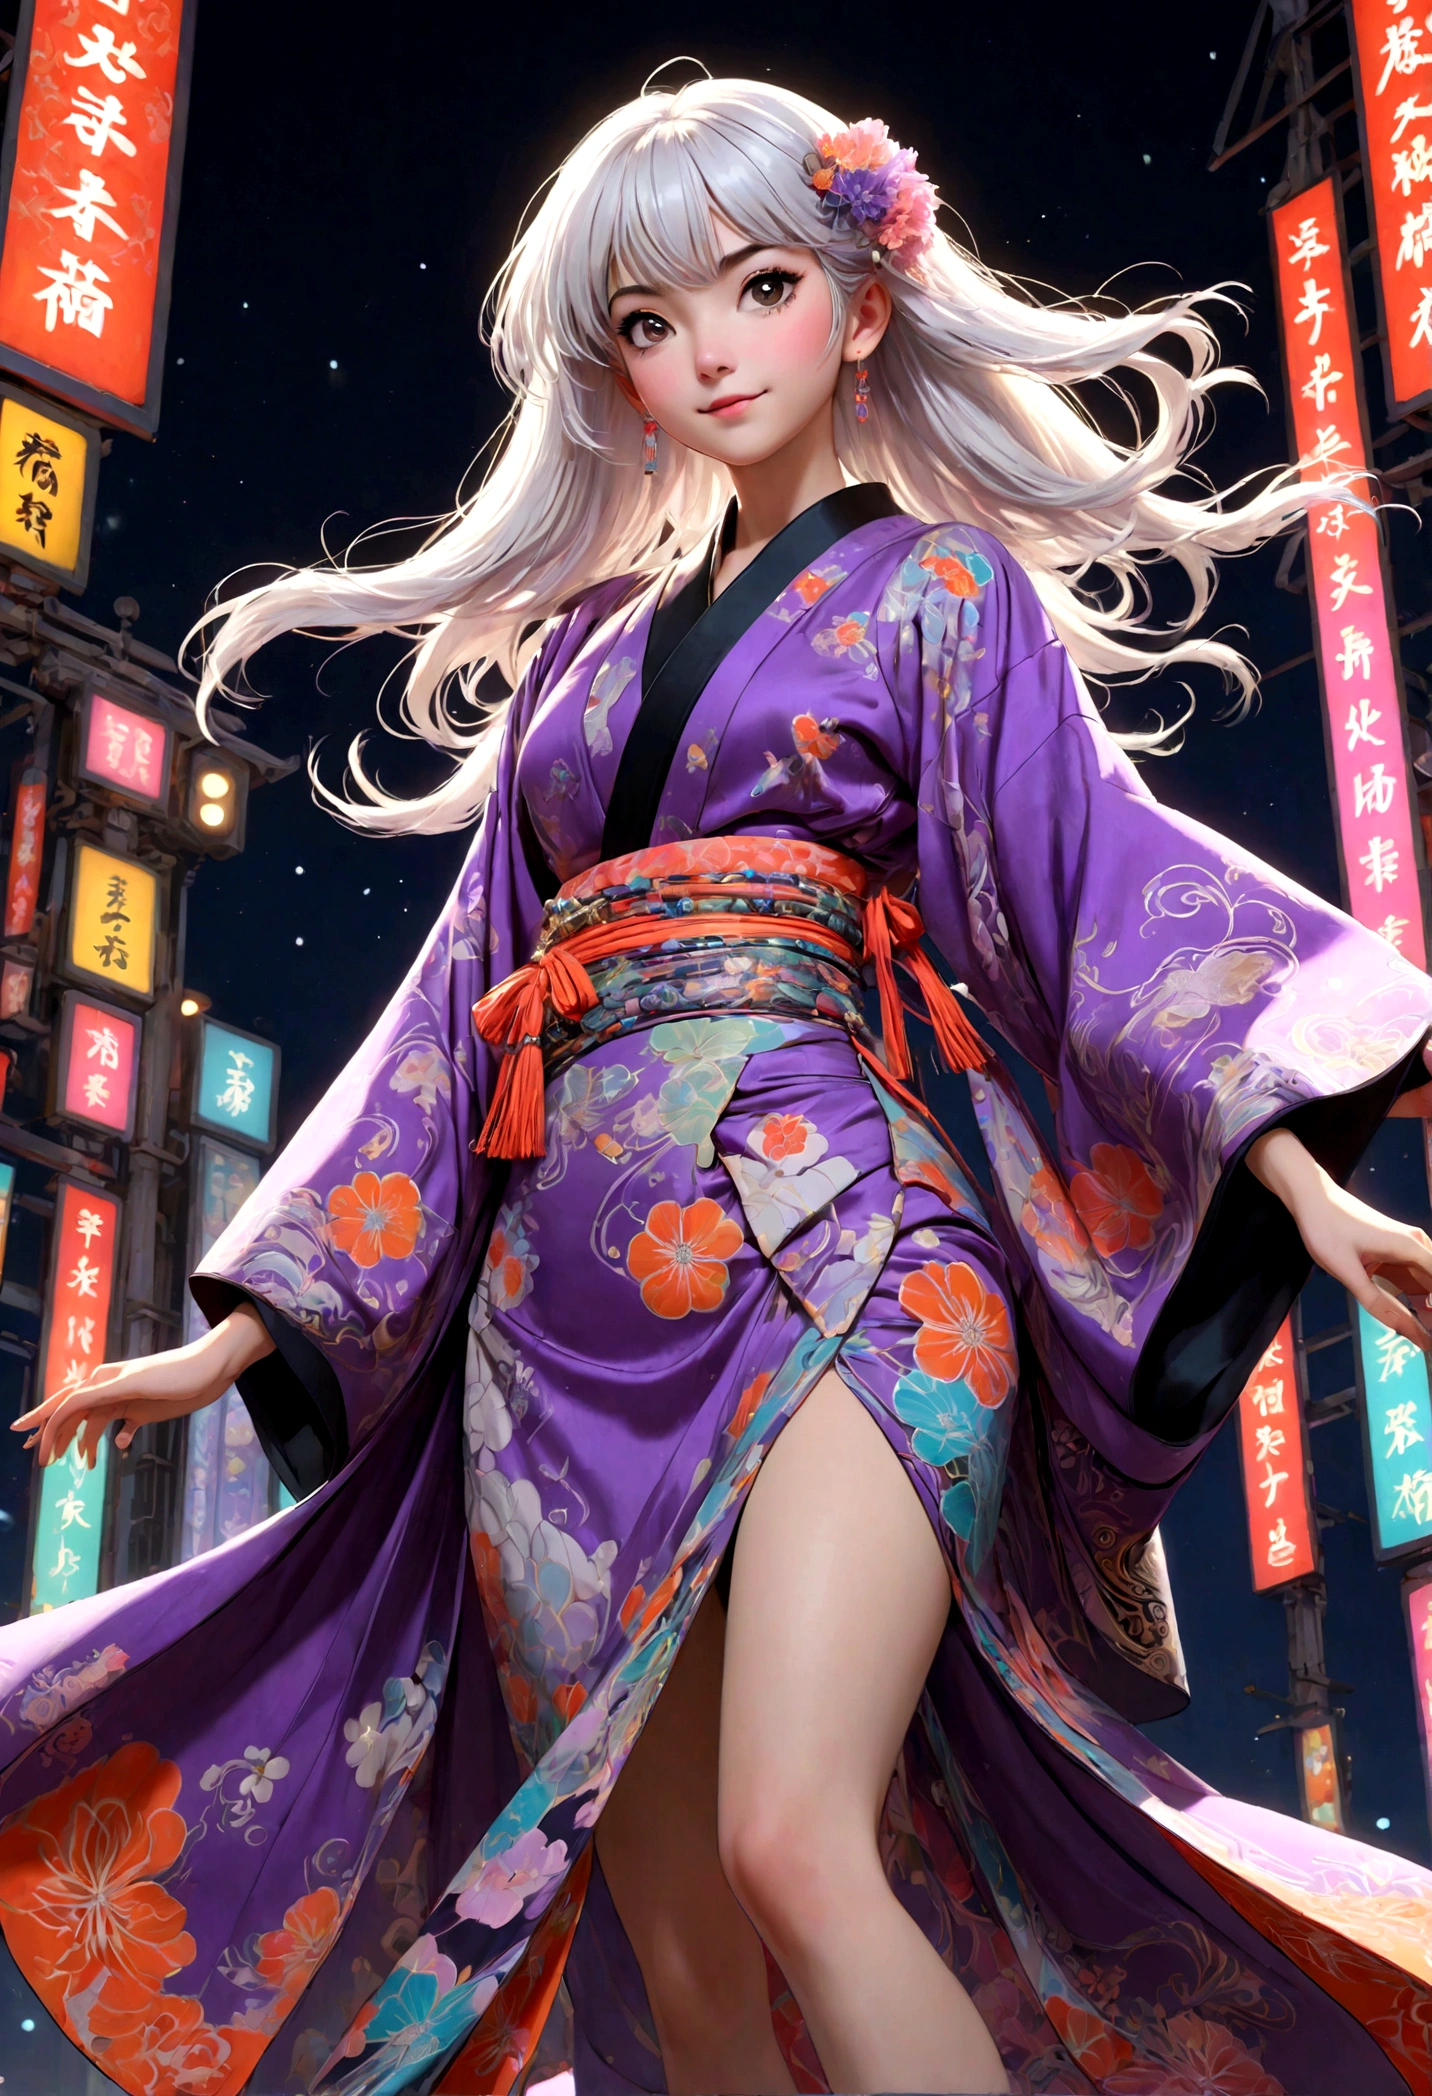 (Ultra-detailed face, looking away:1.3), (Fantasy Illustration with Gothic & Ukiyo-e & Comic Art), (The scene looks up at the runway from below:1.4), (Full Body, A young-aged woman with white hair, blunt bangs, Very long disheveled hair, lavender eyes), (She is jumping, singing, dancing, and walking down a fashion show runway in an avant-garde, futuristic neon-colored Japanese kimono, smiling and striking daring poses), (In the background, lights of various colors in an art nouveau style are flitting about)